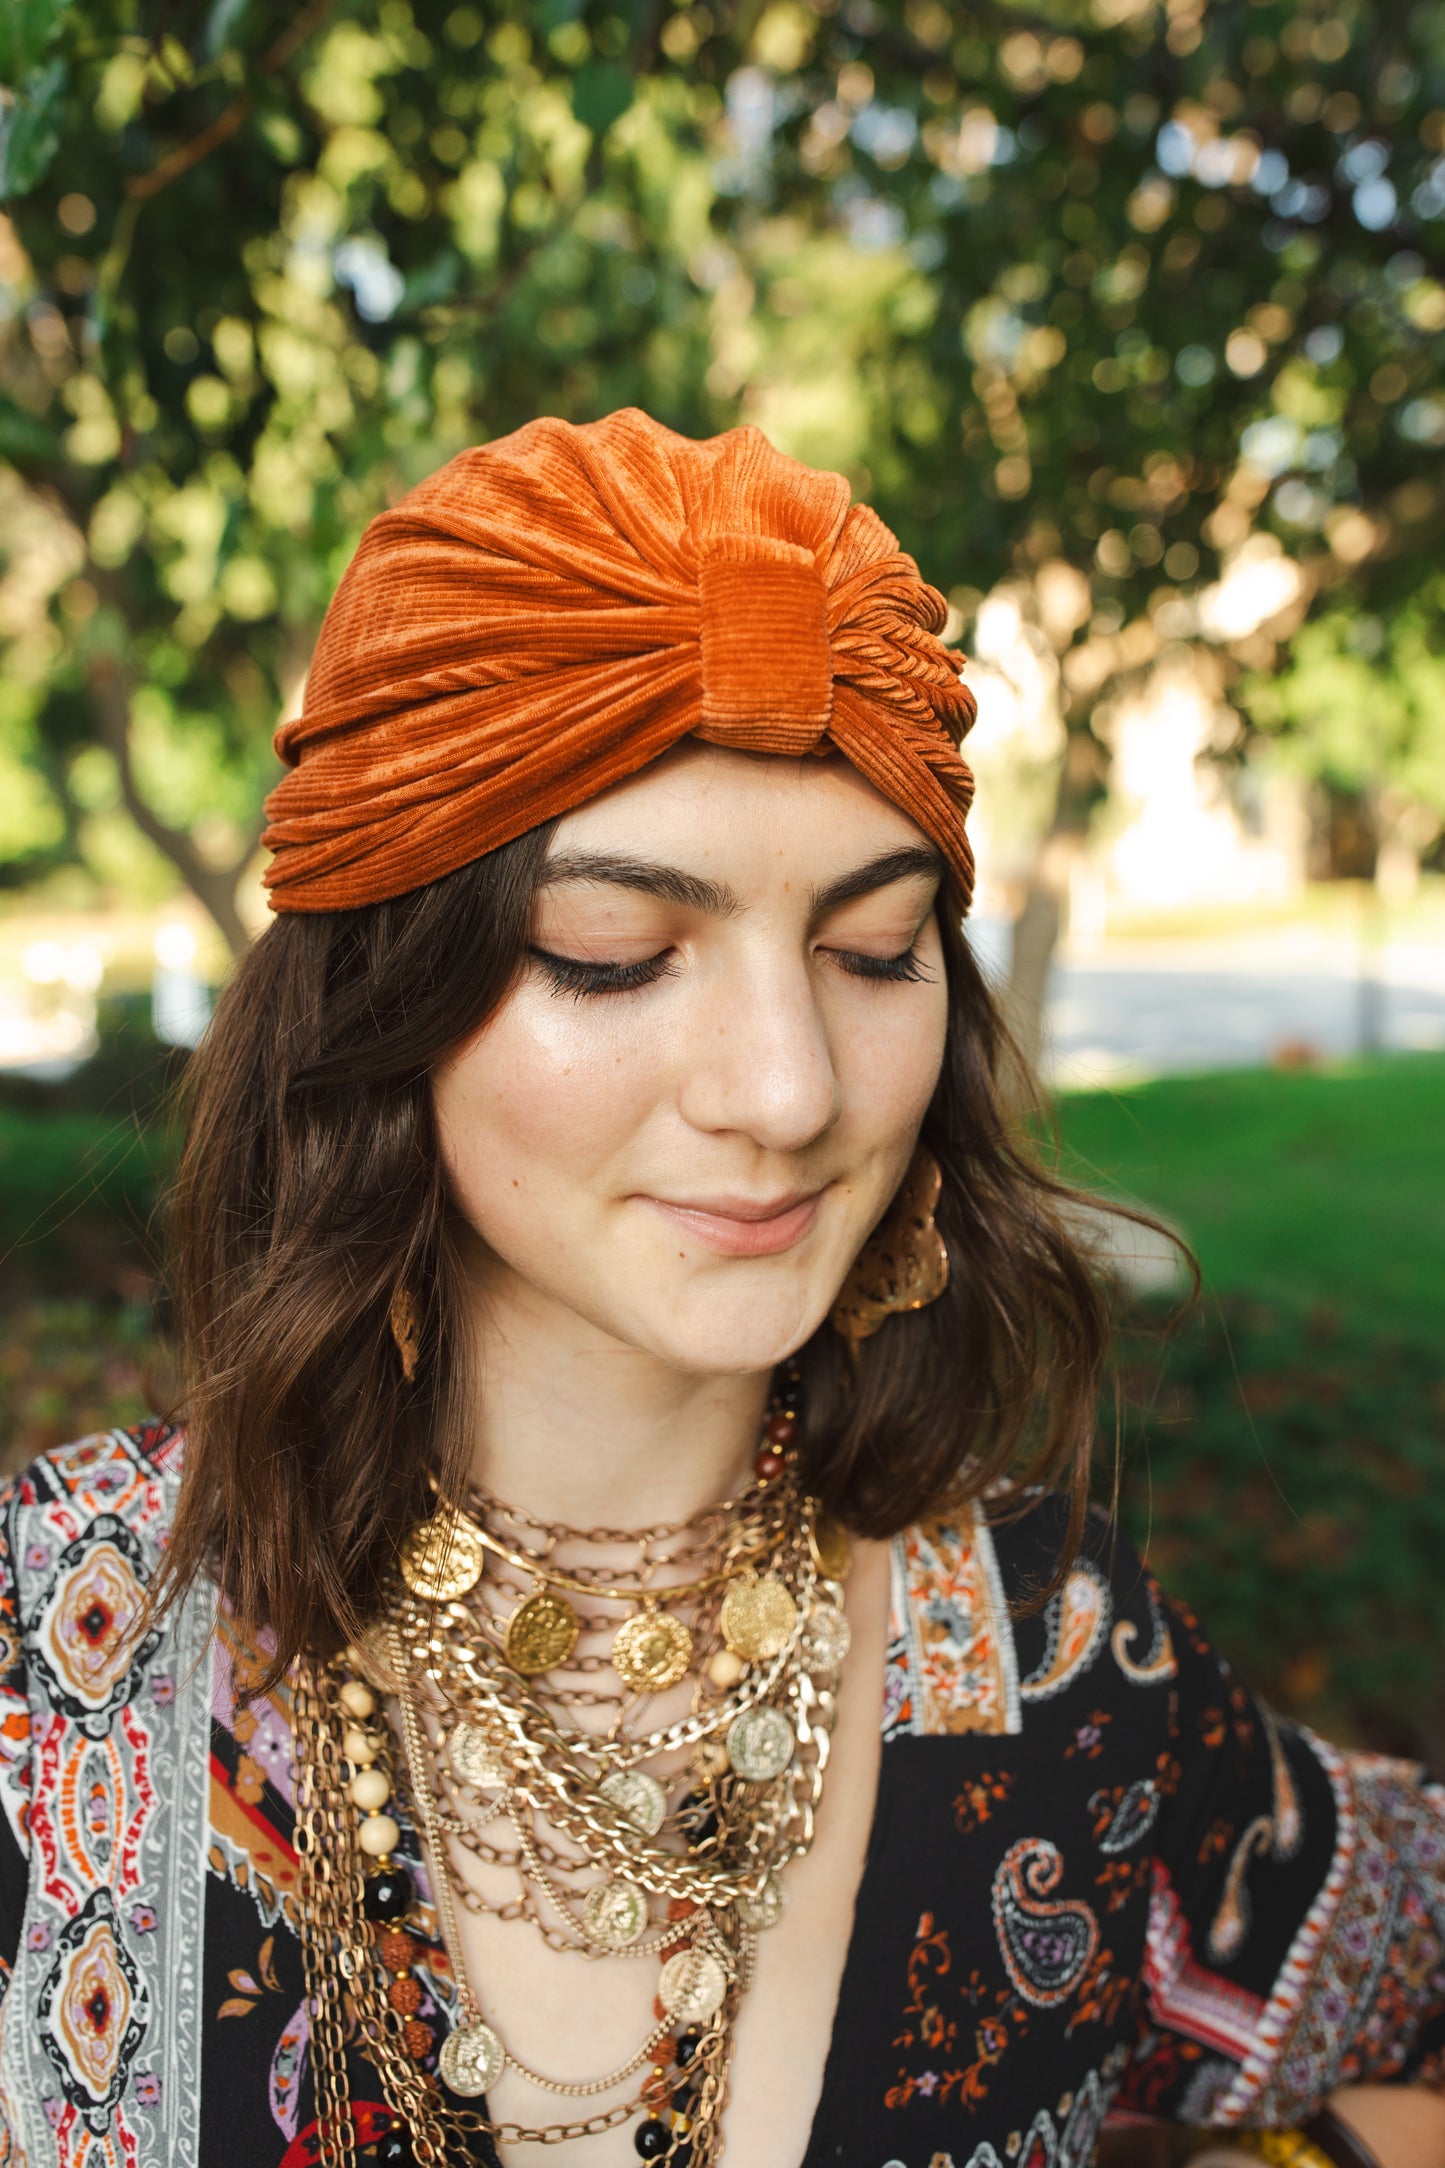 Apricot orange, ribbed stretch velvet fashion turban hat that wears similar to a beanie, with ruching of the fabric that meets front and center at an elegant knot. Vintage-inspired retro 1920s mixed with a modern fabric.